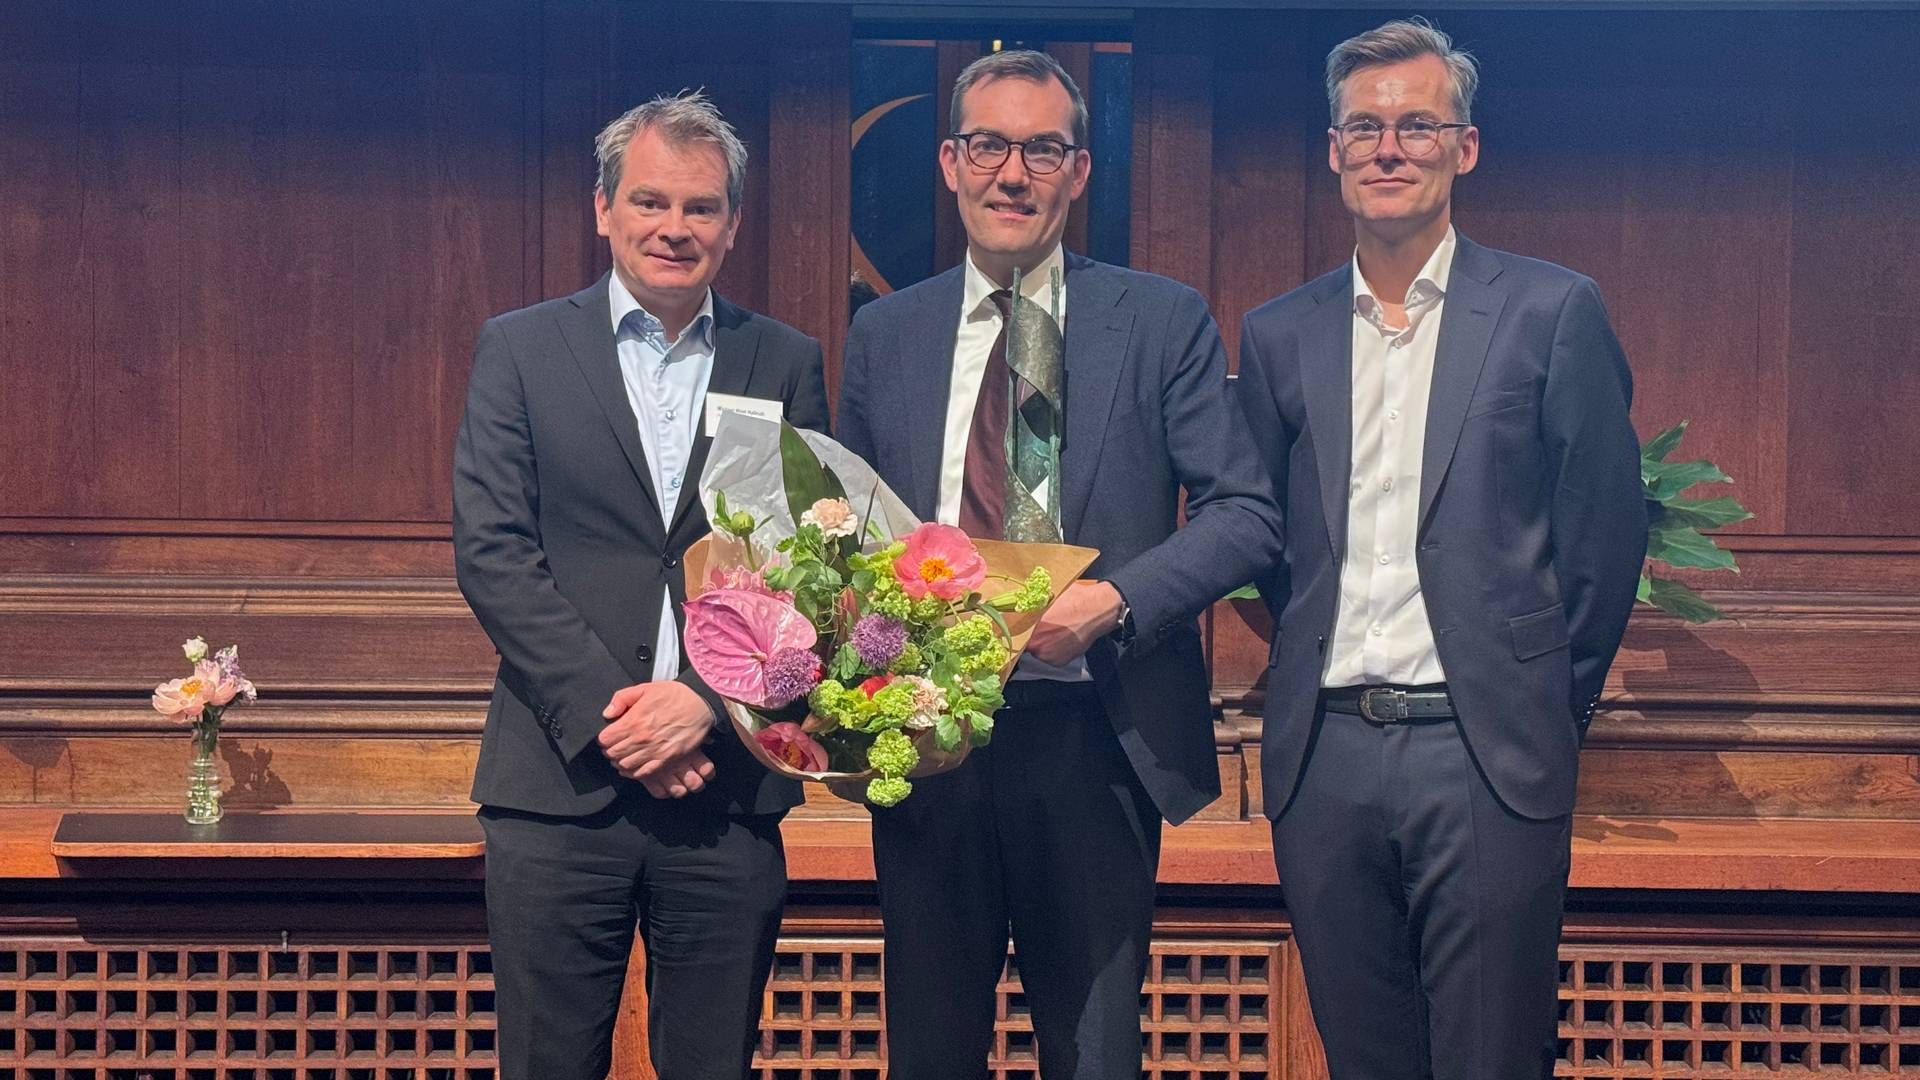 Daniel Bohsen (in the middle), CVP & Head of Investor Relations at Novo Nordisk, accepted the Information Prize, which was presented by Michael West Hybholt (left) and Carsten Lønborg Madsen from Finansforeningen's Accounting Committee. | Photo: Luke Brook